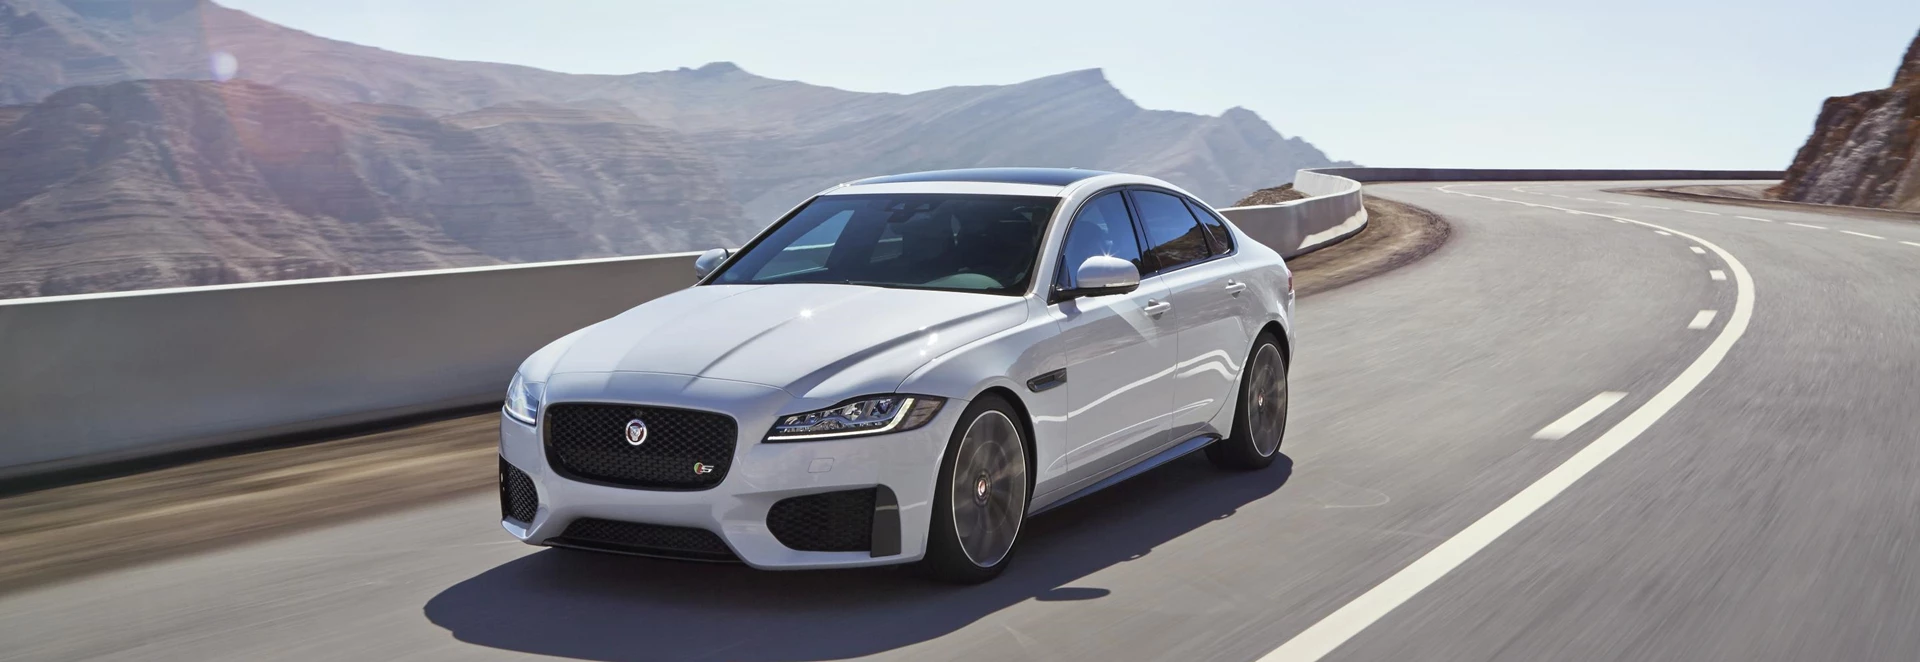 Why the Jaguar XF is the true meaning of luxury